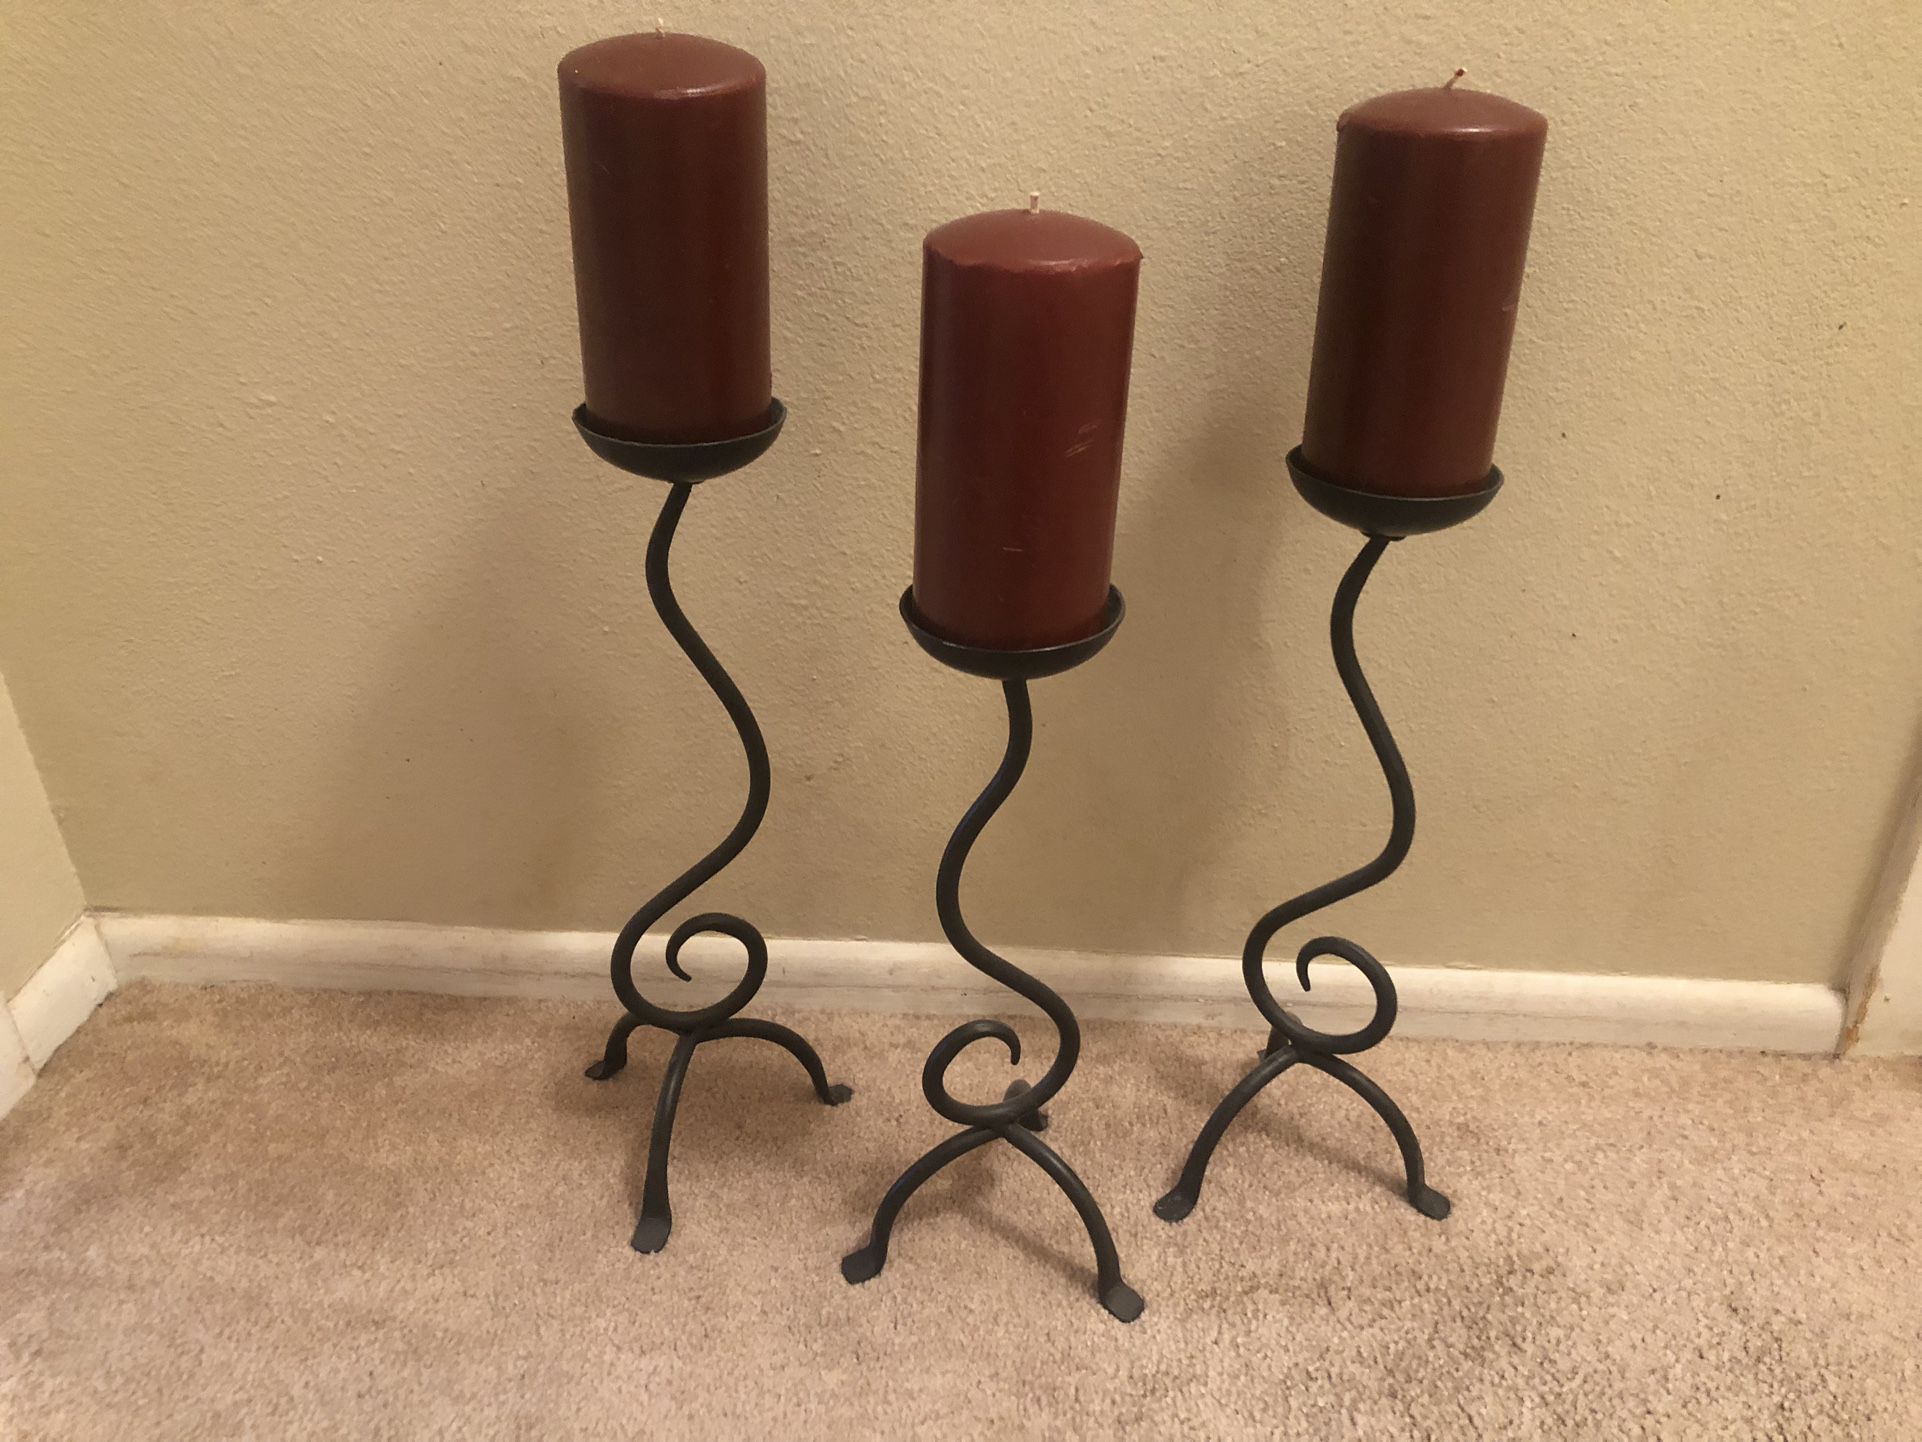 Metal Candle Stick & Rust Candles